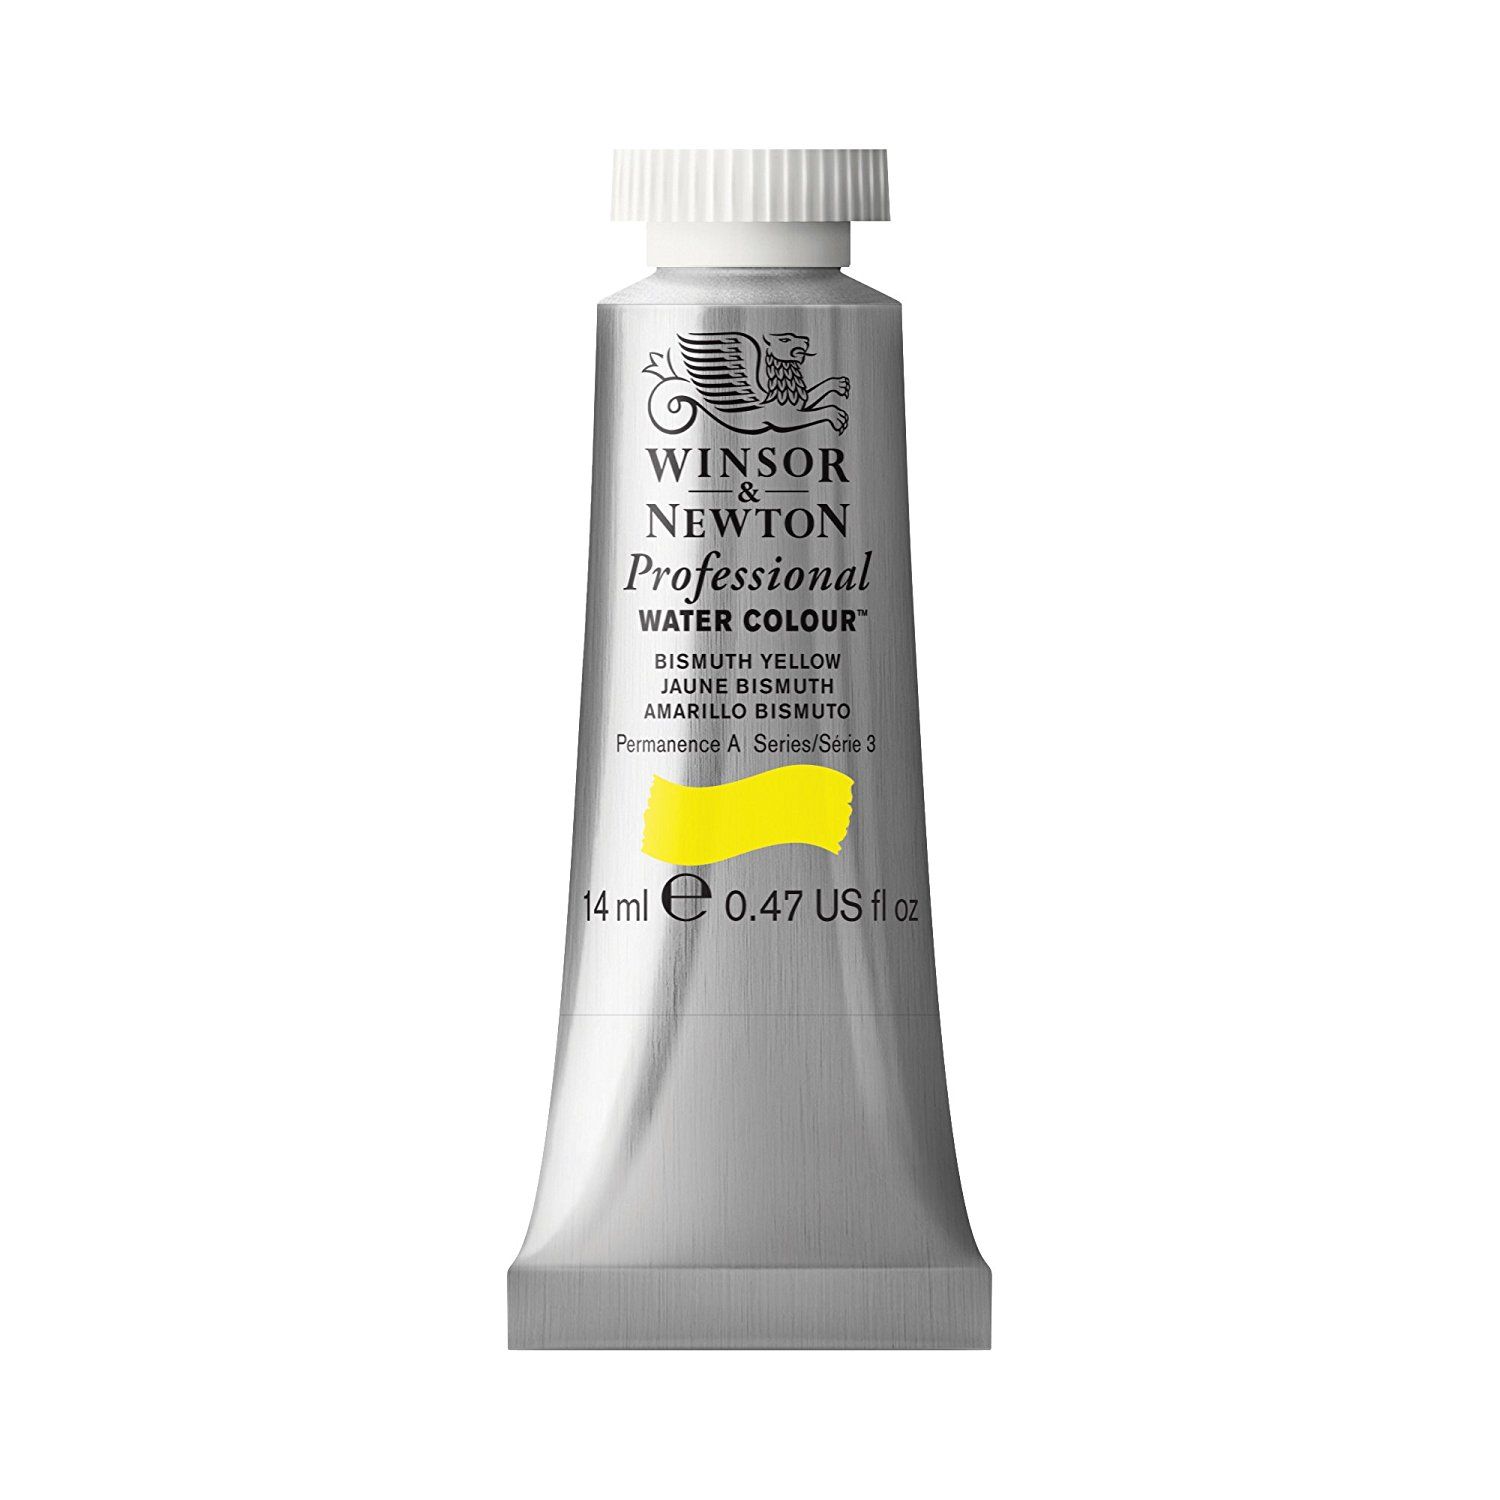 Winsor & Newton Watercolour Paint - Bismuth Yellow 14ml